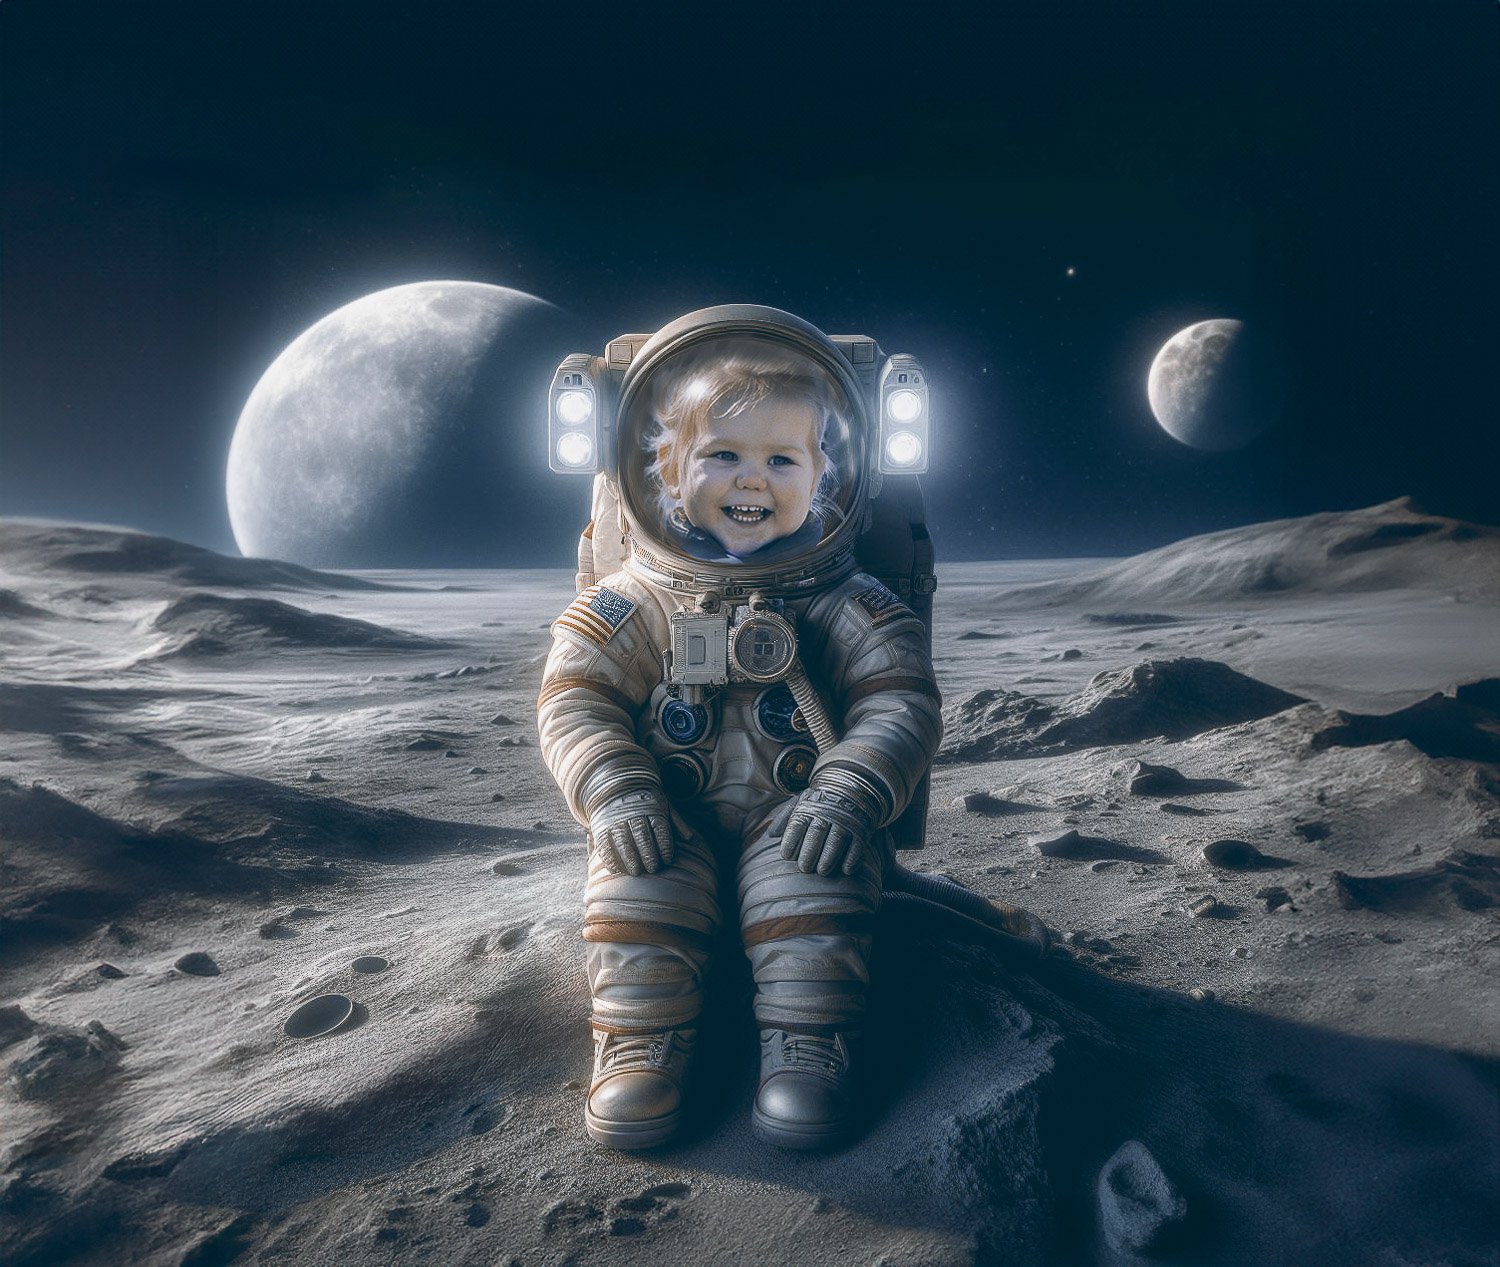 A little girl in a space suit sitting on a rock on a desolate moonscape 